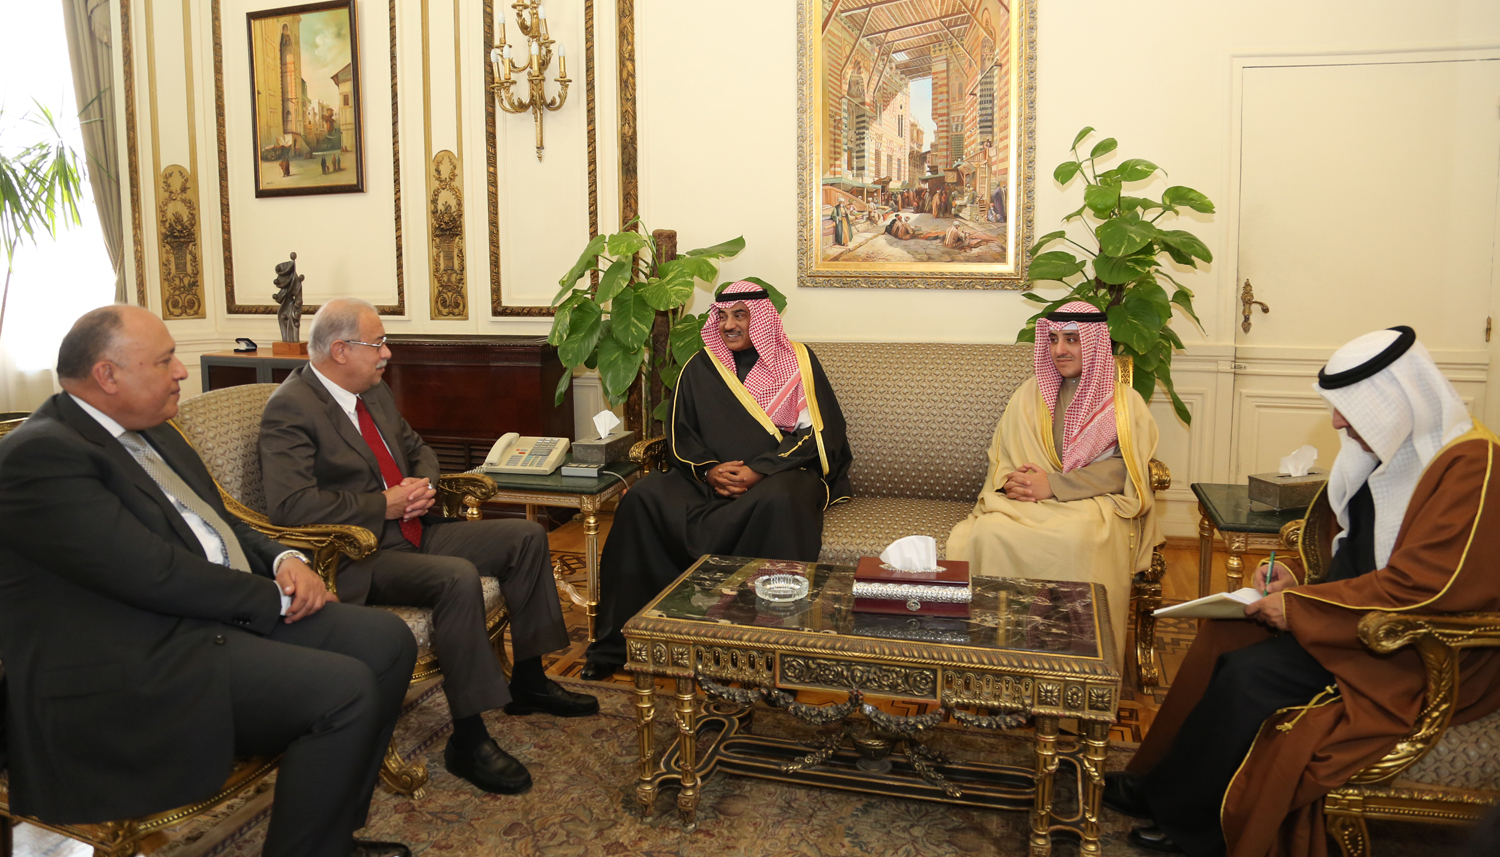 Kuwait's visiting First Deputy Prime Minister and Minister of Foreign Affairs Sheikh Sabah Al-Khaled Al-Hamad Al-Sabah meets with Egyptian Prime Minister Sharif Ismail